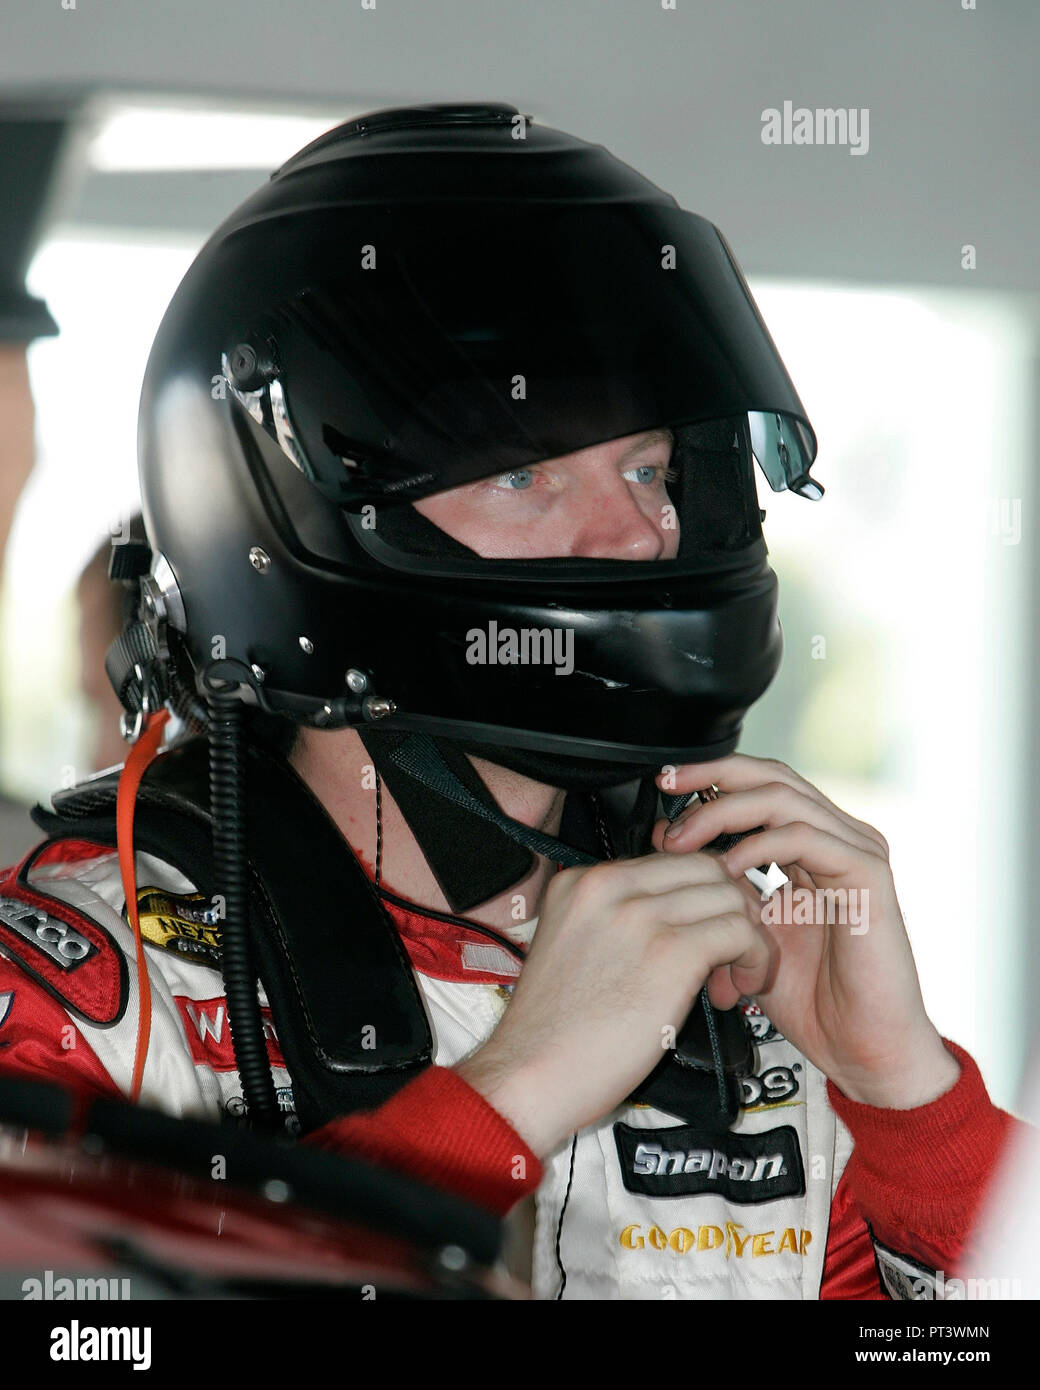 NASCAR Nextel Cup driver Dale Earnhardt Jr. prepares for a testing session at the Homestead-Miami Speedway, in Homestead,  Florida, on November 9, 2005. Stock Photo